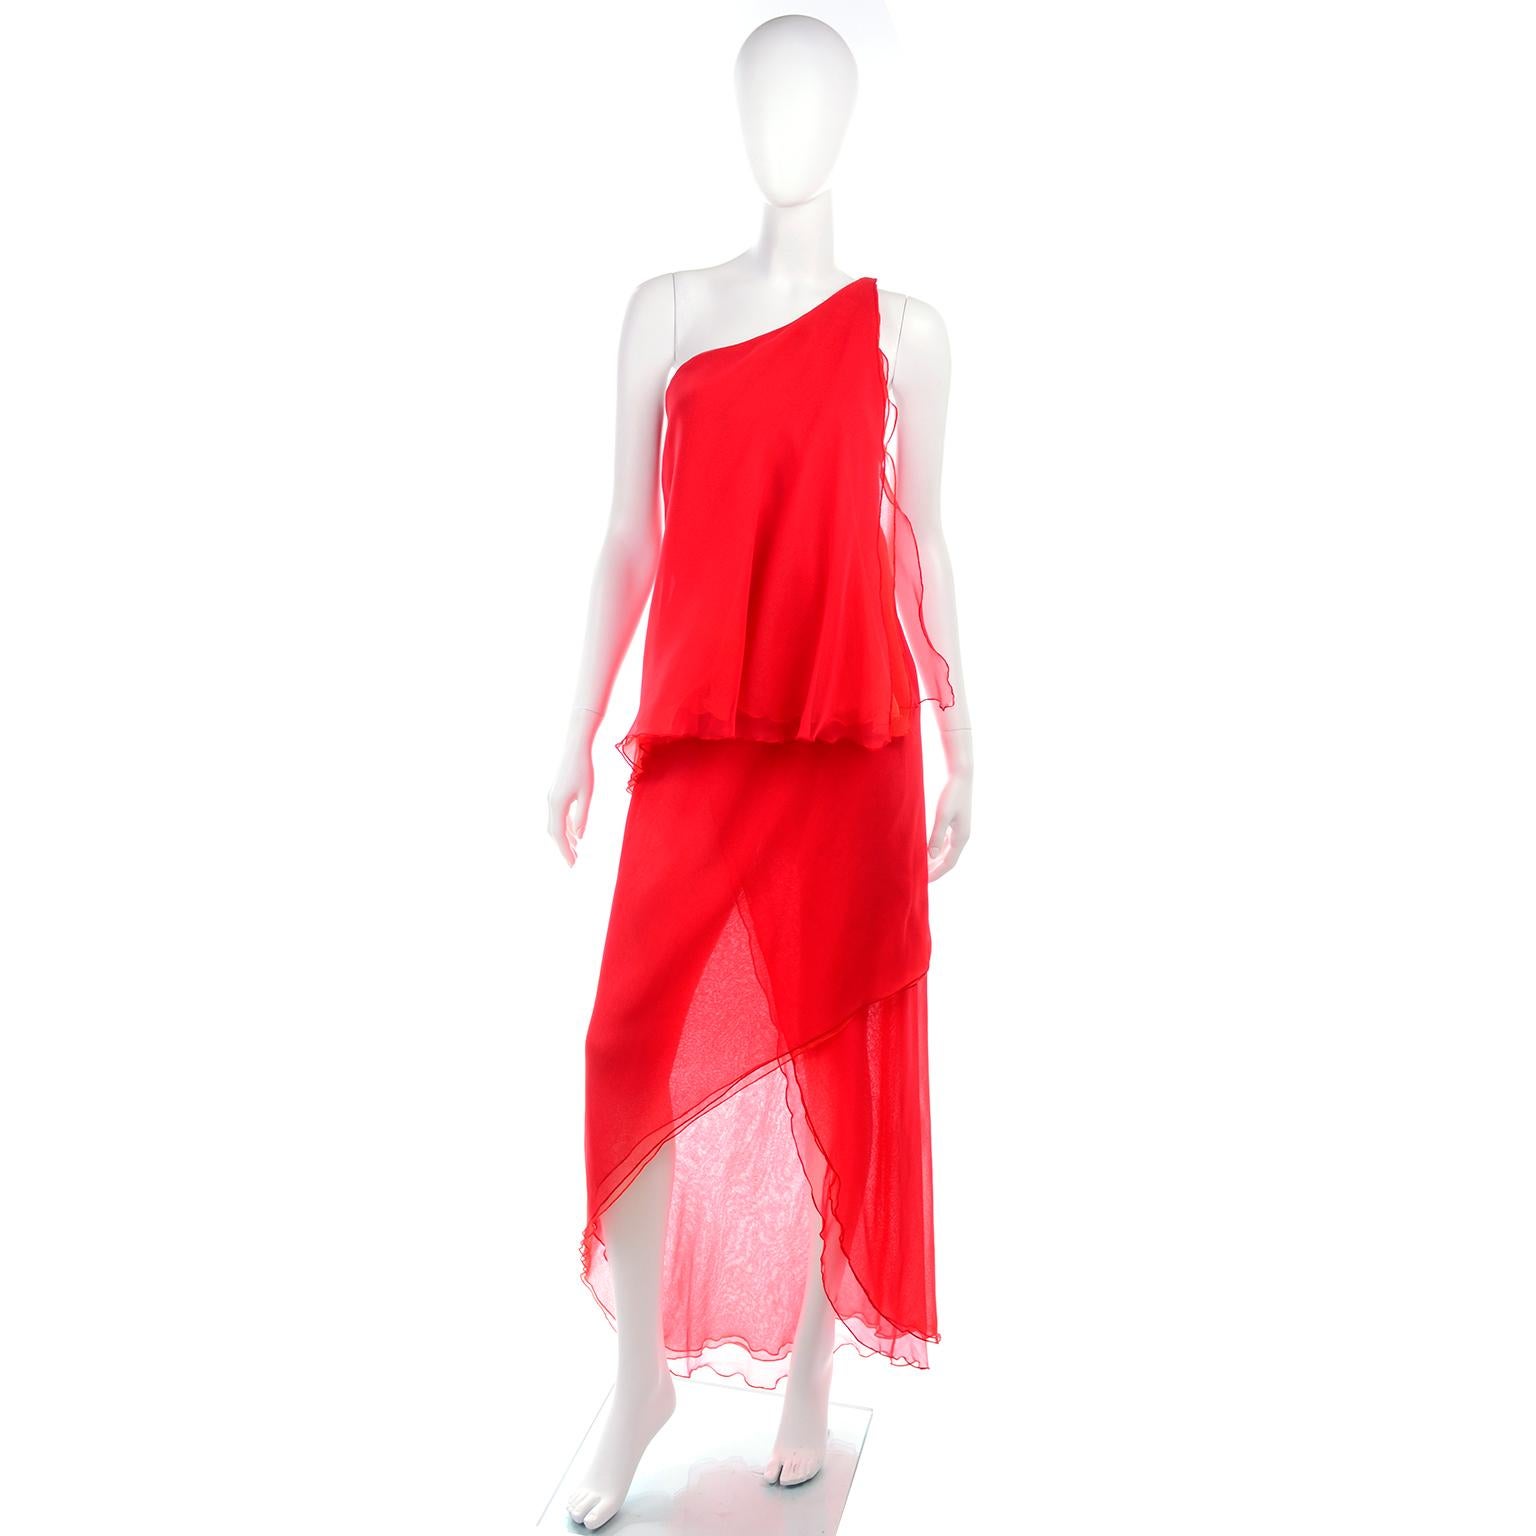 This is a really fun tomato red tiered vintage dress designed by Victor Costa in the 1970's.. The dress has one shoulder styling and the skirt is sheer. The body of this poly chiffon dress is one piece of fabric that wraps around body so the waist